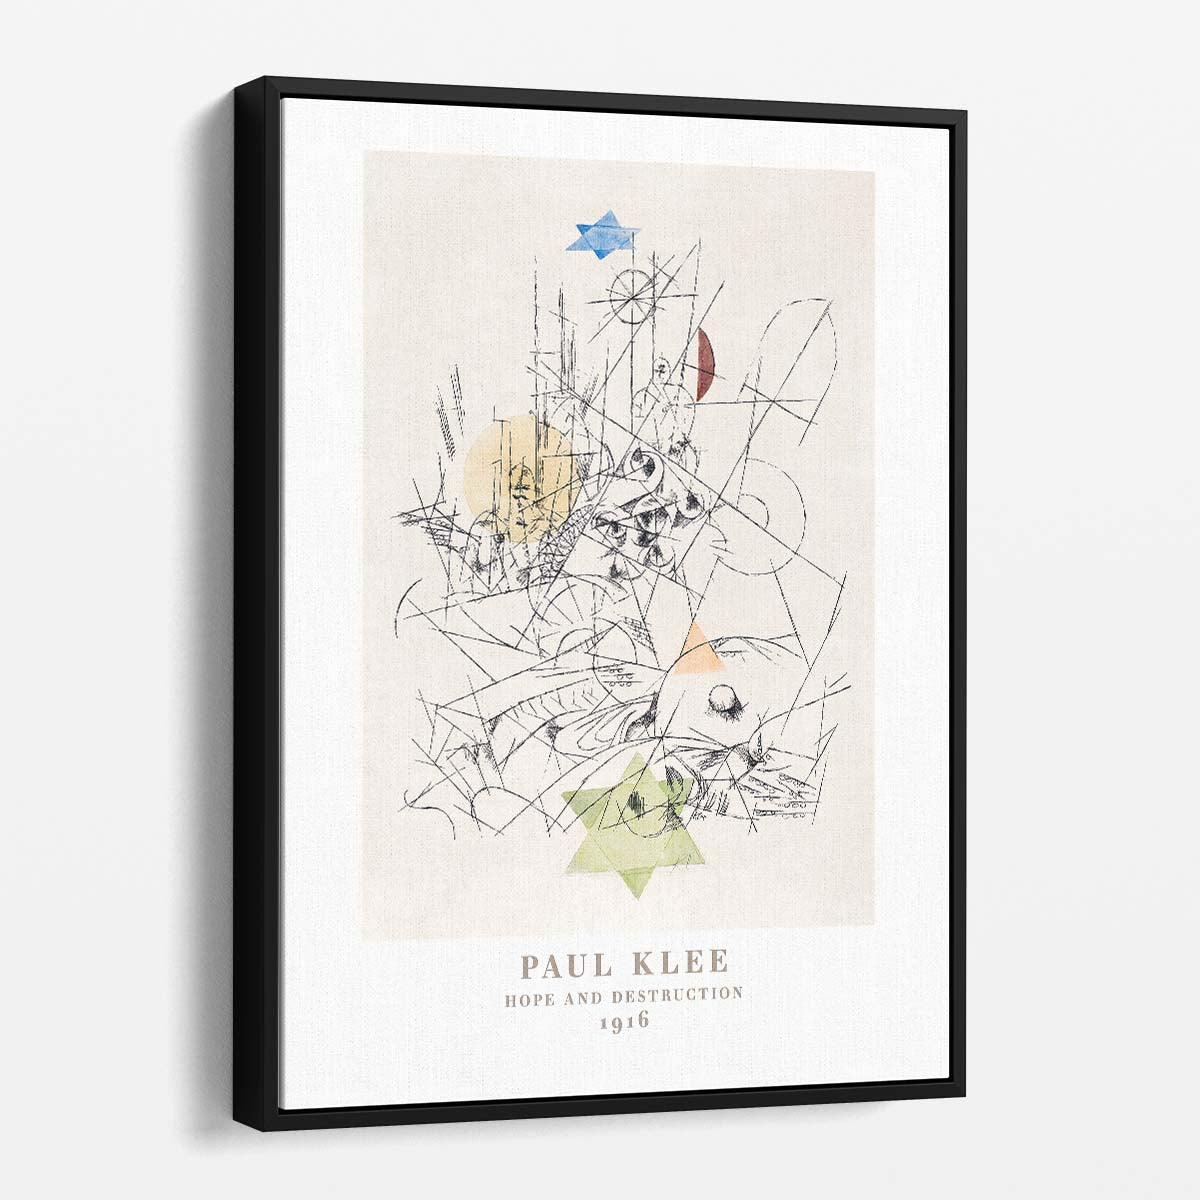 Paul Klee's 1916 Masterpiece 'Hope and Destruction' Abstract Line Art Poster by Luxuriance Designs, made in USA